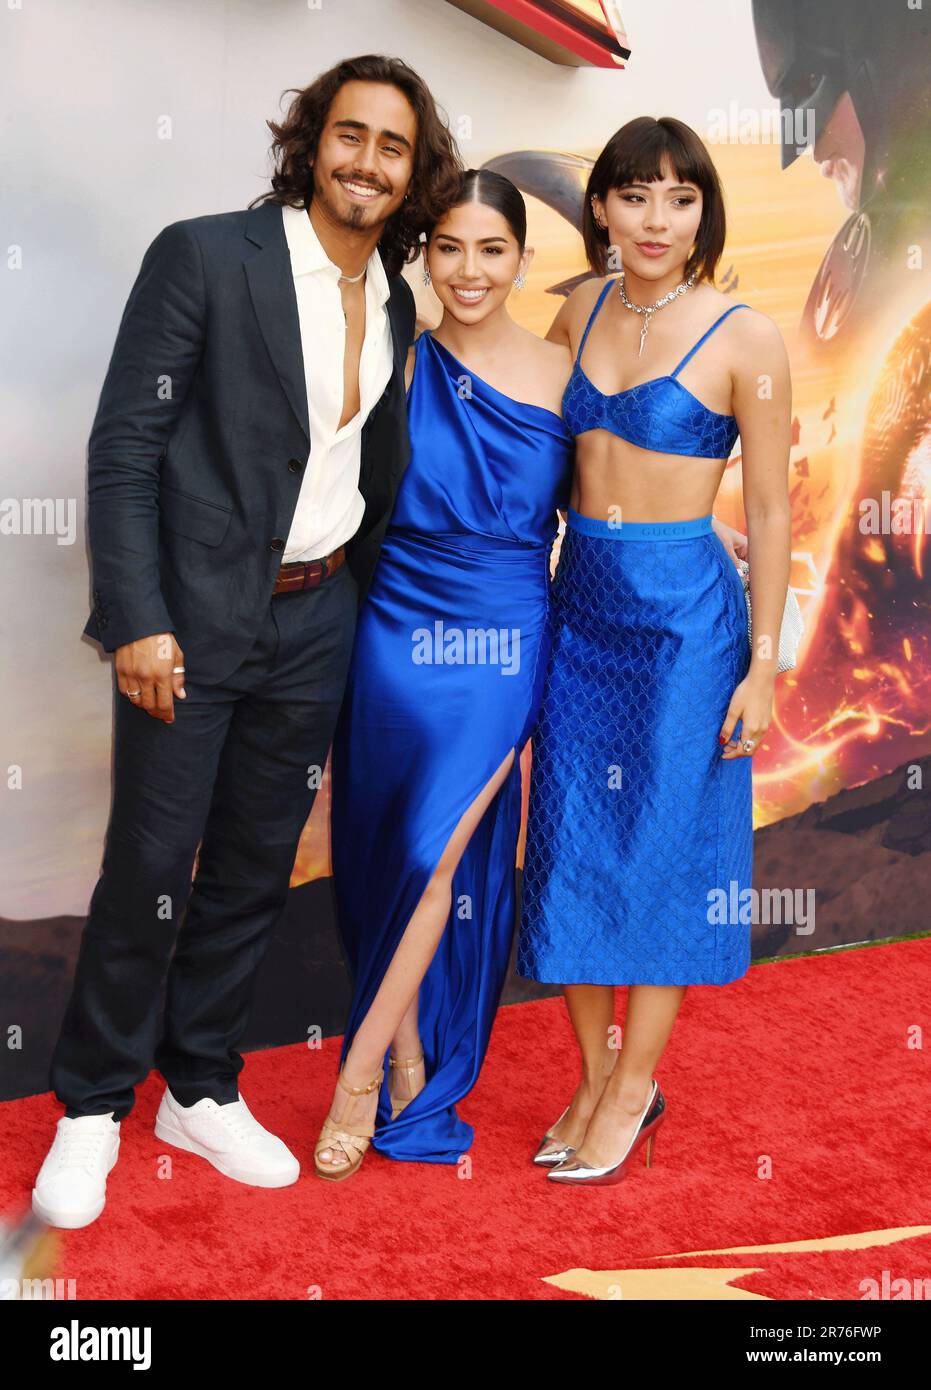 Hollywood, California, USA. 12th June, 2023. (L-R) Michael Cimino, Amanda Diaz and Xochitl Gomez attend the Los Angeles premiere of Warner Bros. 'The Flash' at Ovation Hollywood on June 12, 2023 in Hollywood, California. Credit: Jeffrey Mayer/Jtm Photos/Media Punch/Alamy Live News Stock Photo